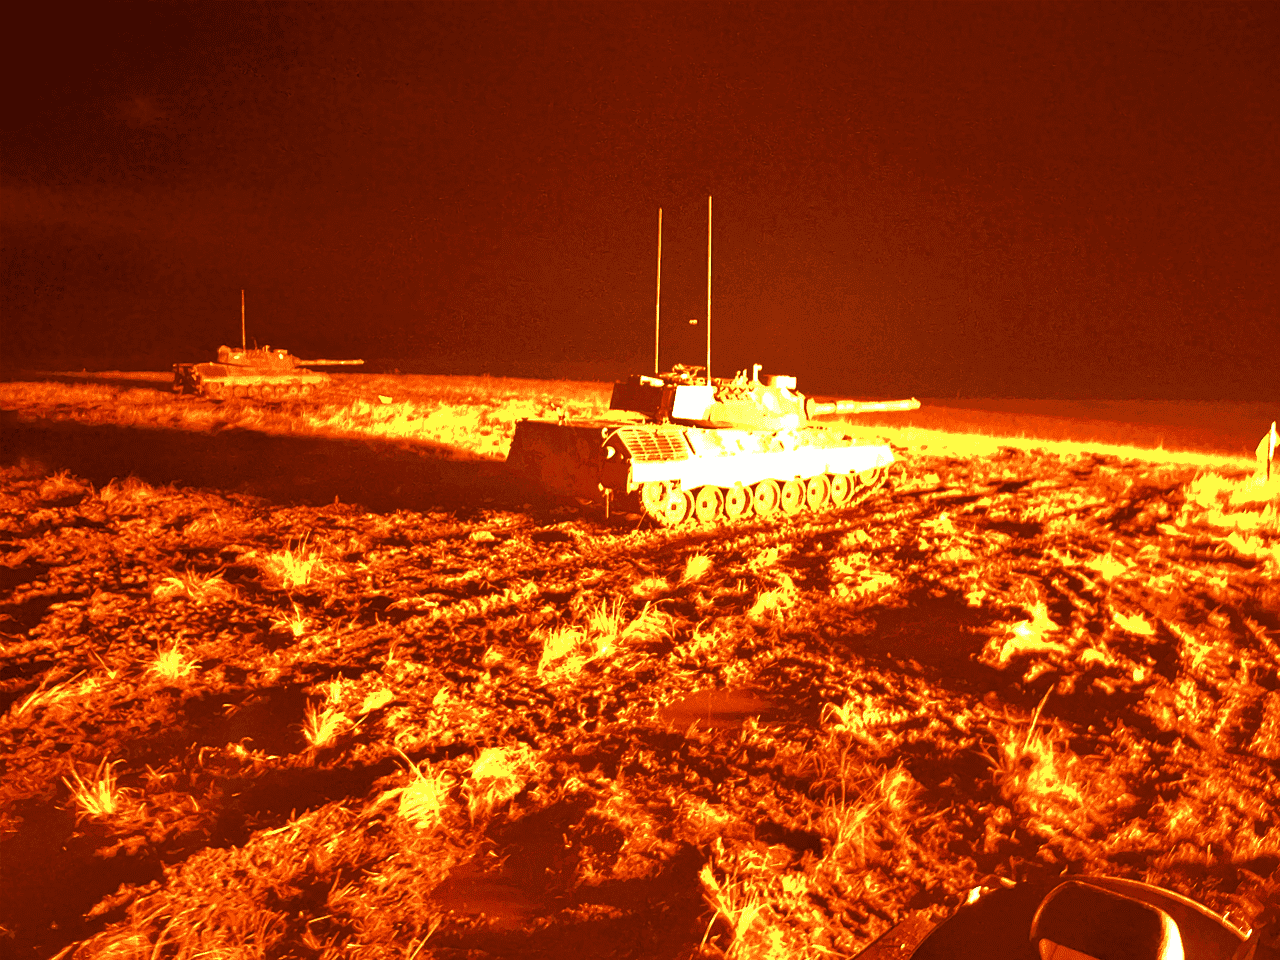 First night firing of the MBT Leopard 1A5 at Armored Cavalry Regiments